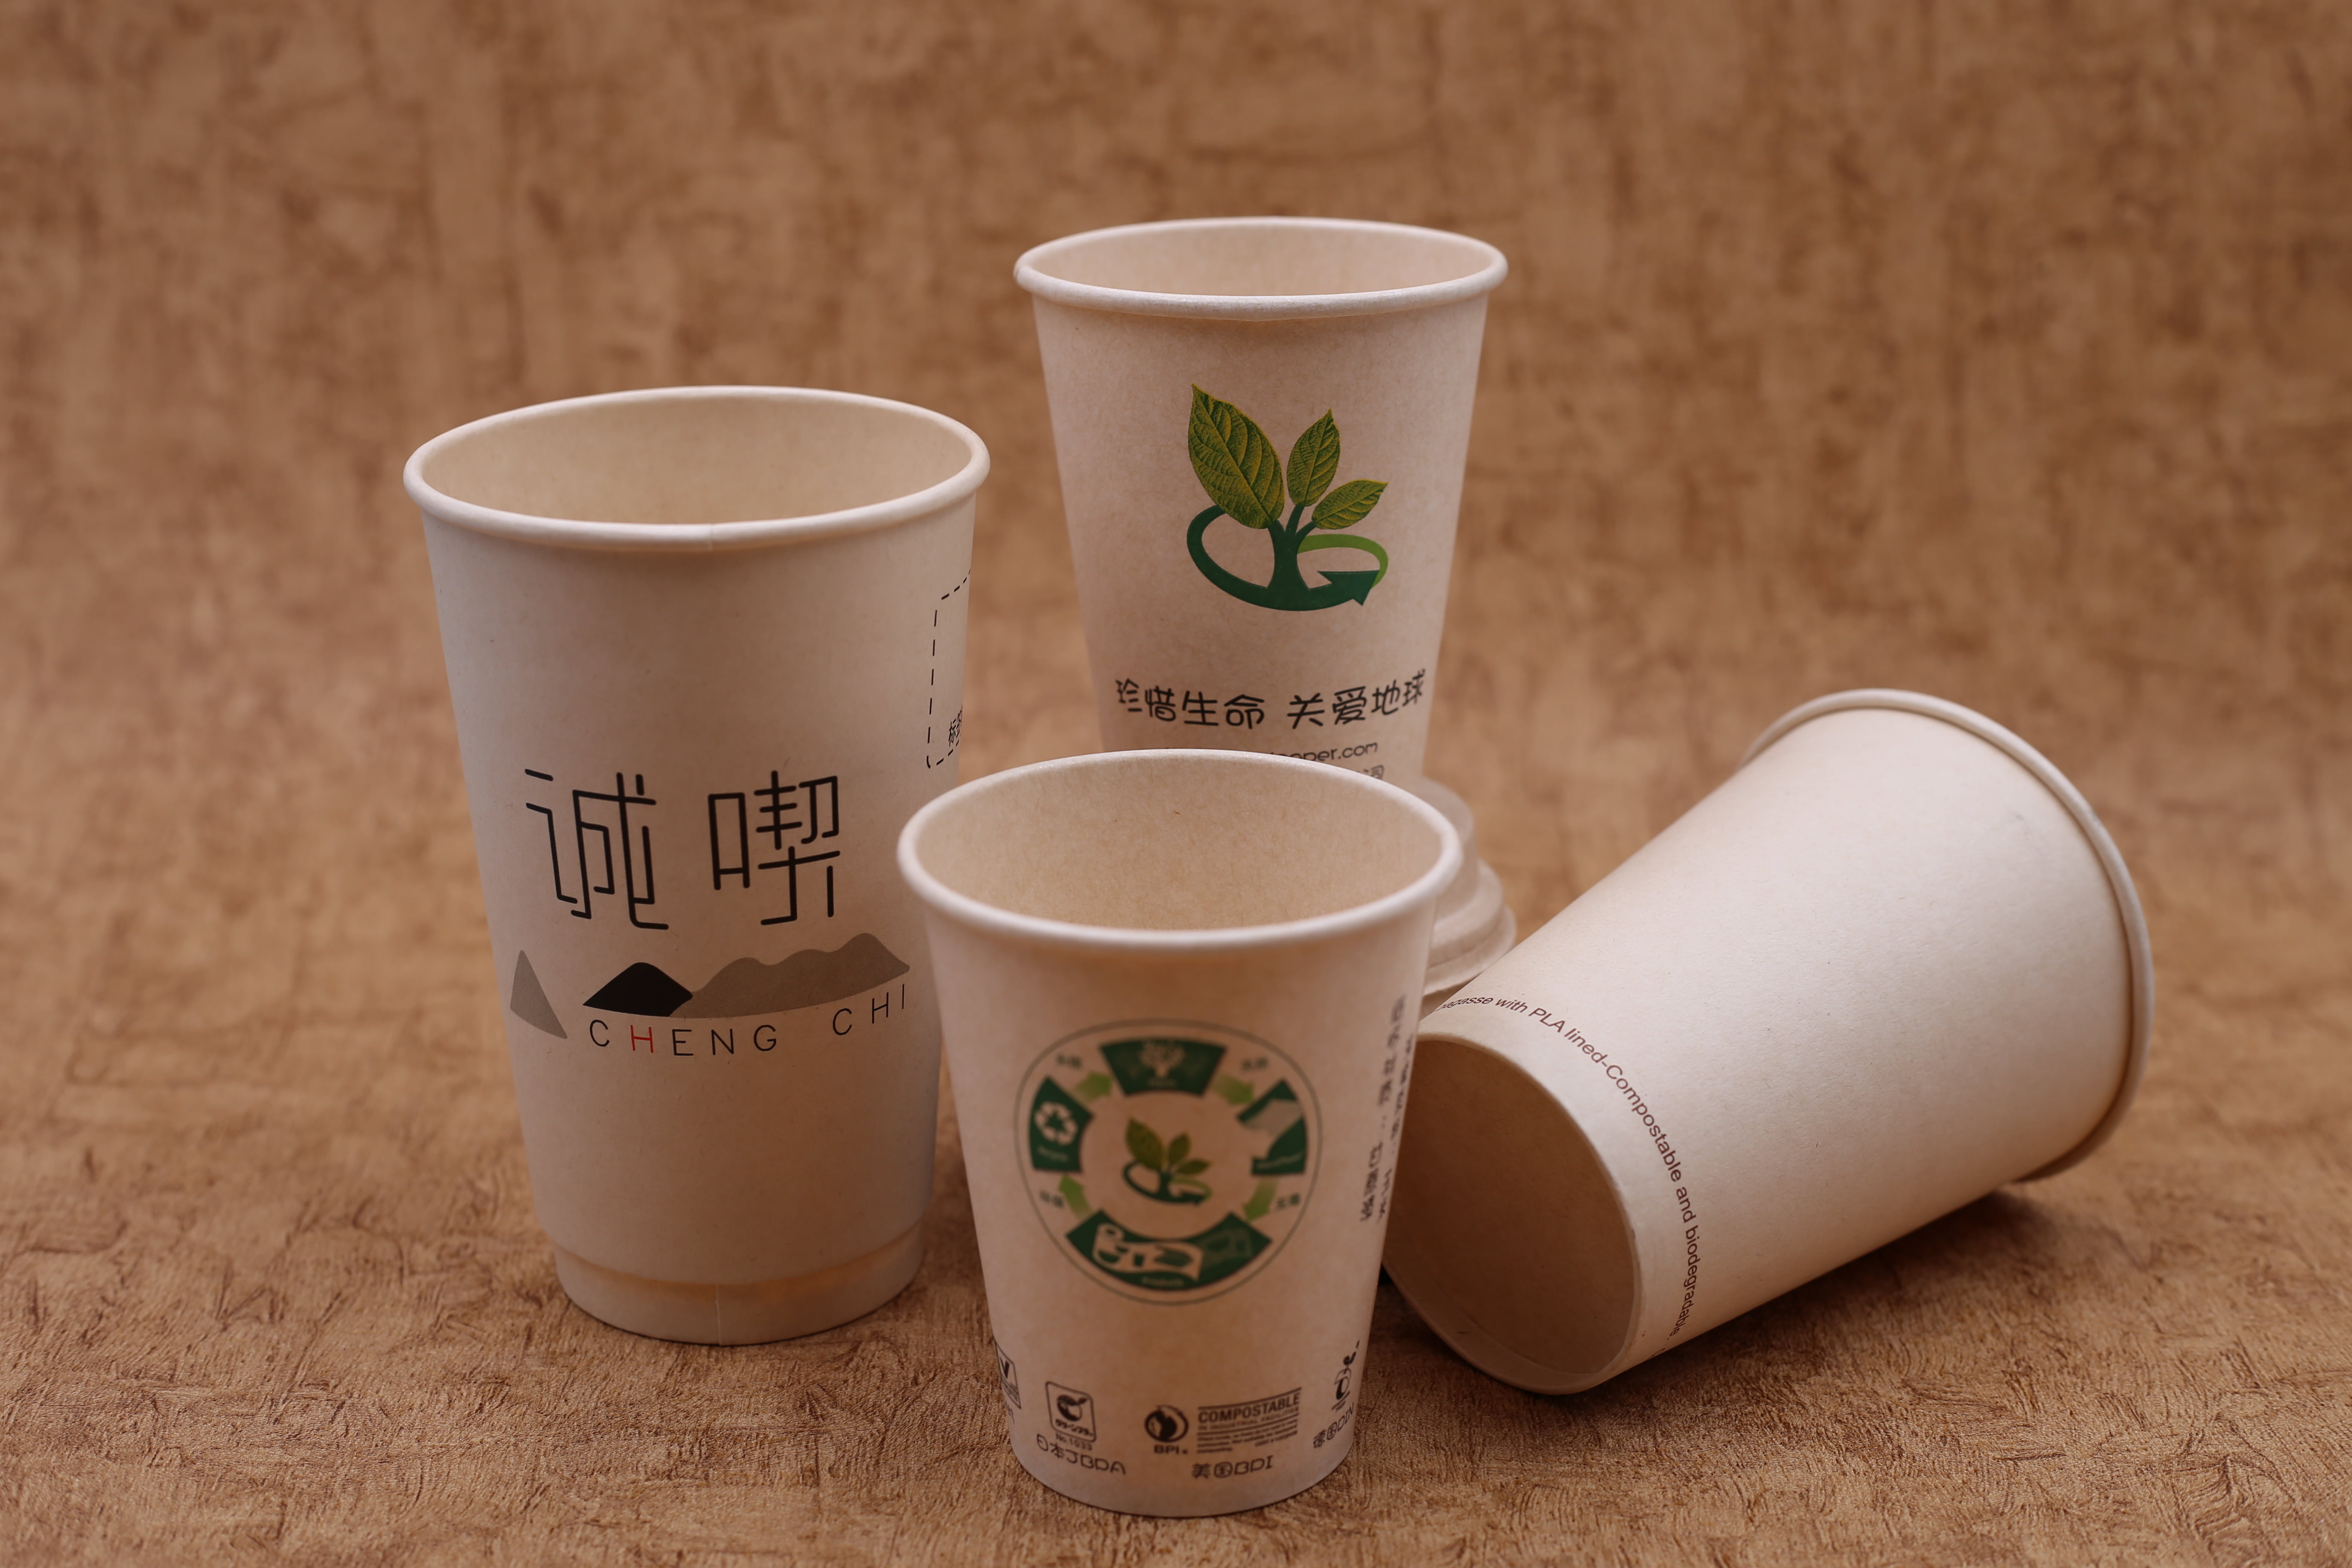 Single layer bagasse cup